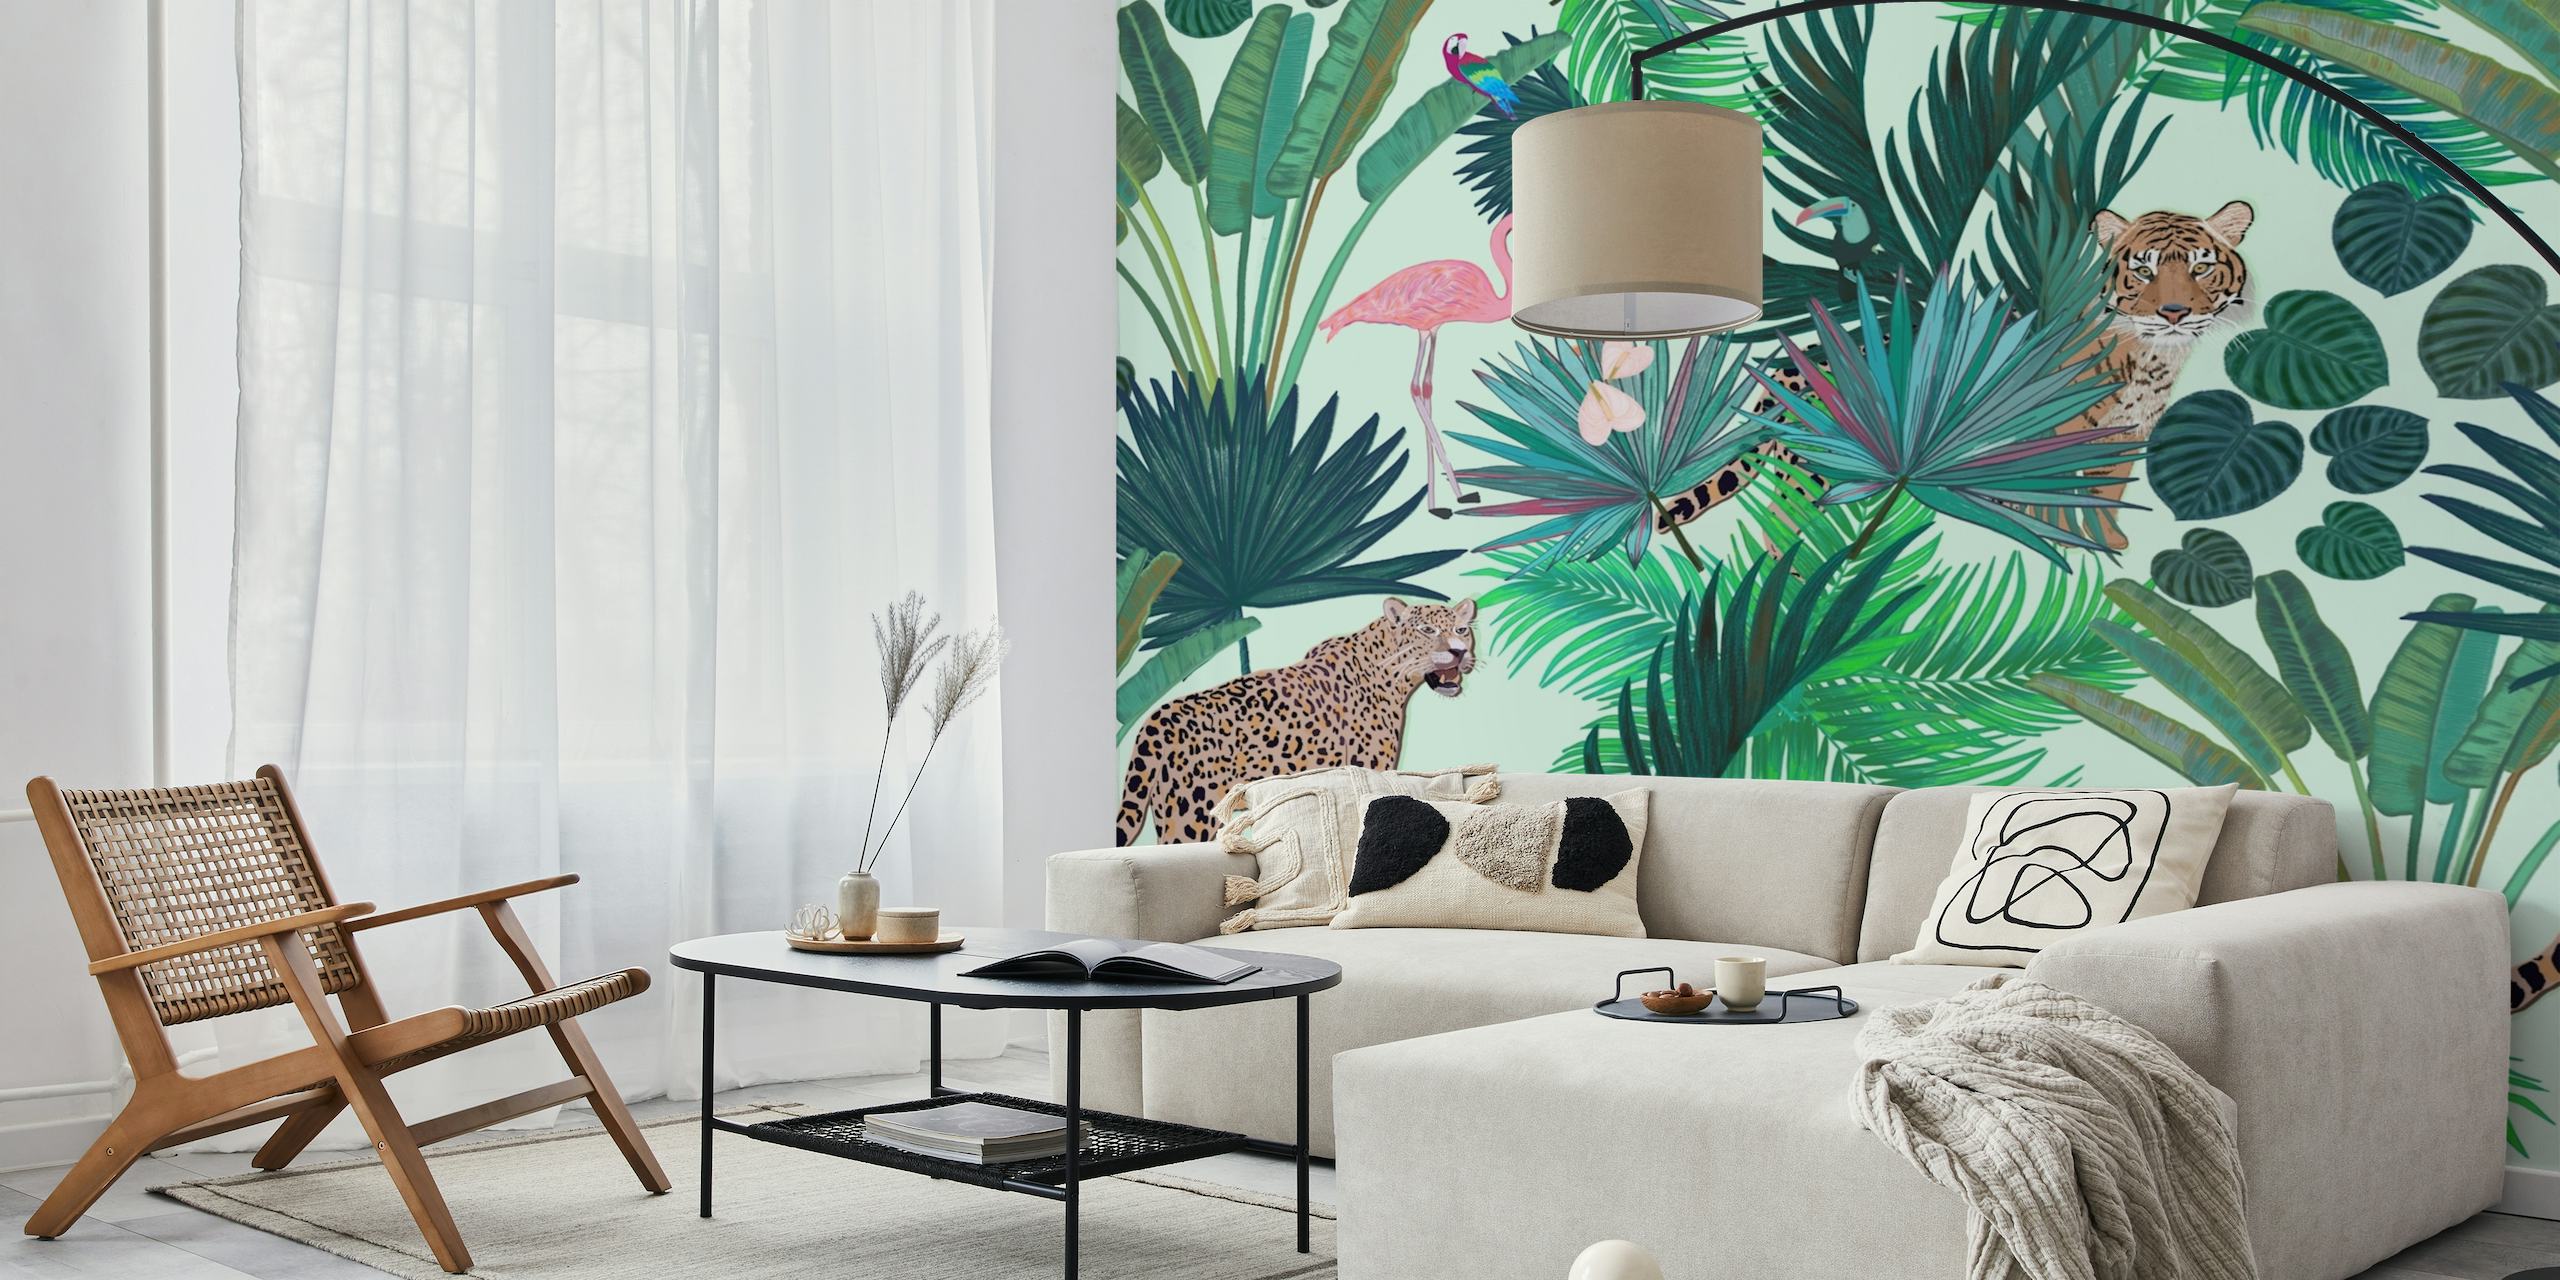 Tropical forest wall mural with tigers and flamingos in greenery